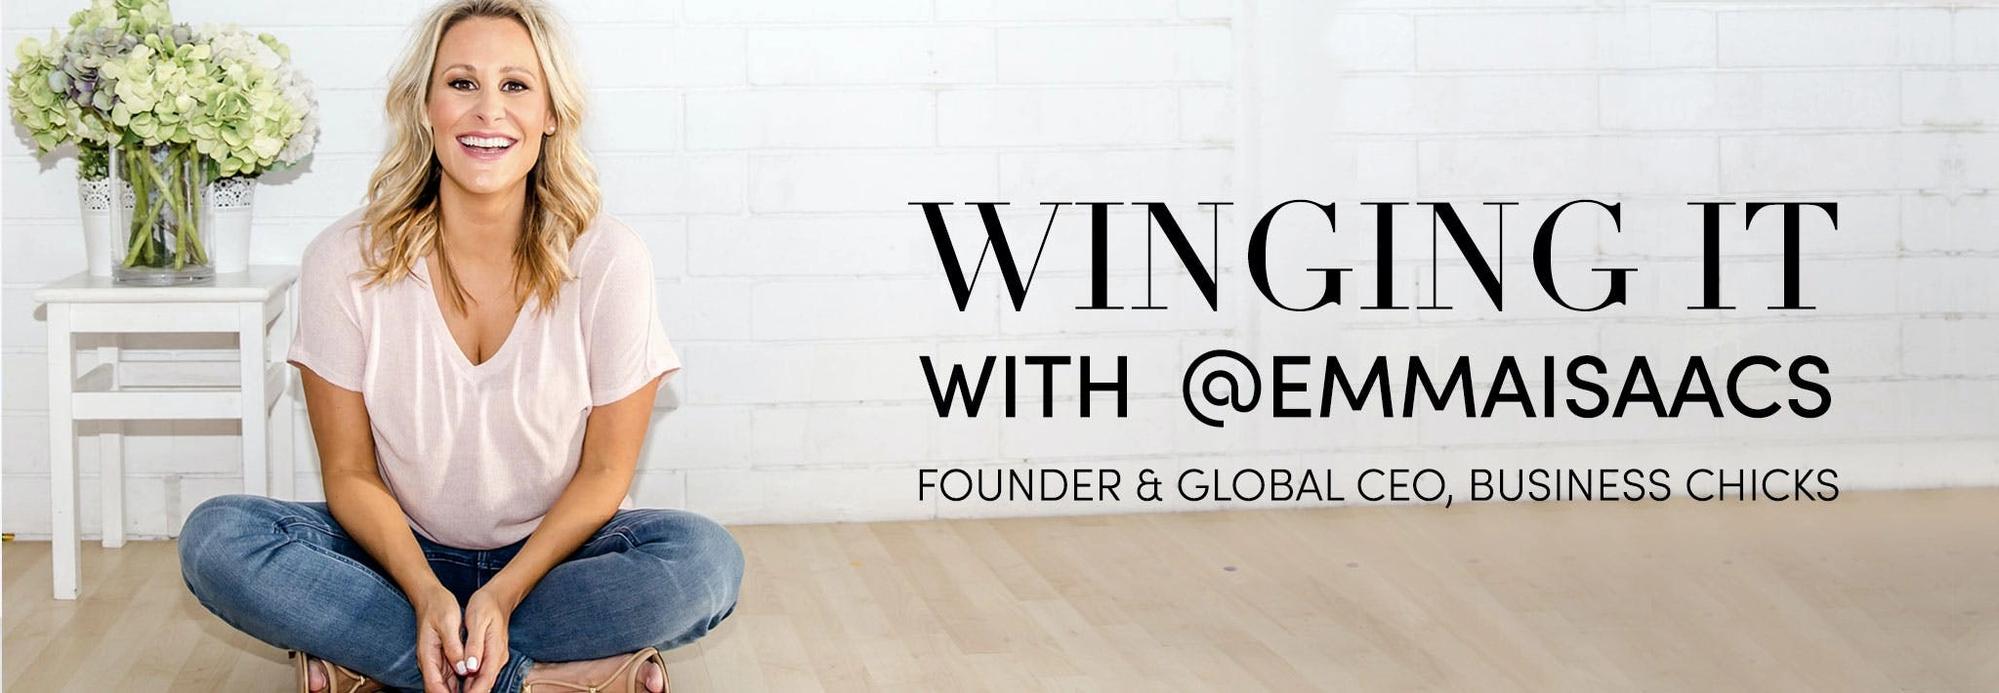 Winging it with @emmaisaacs